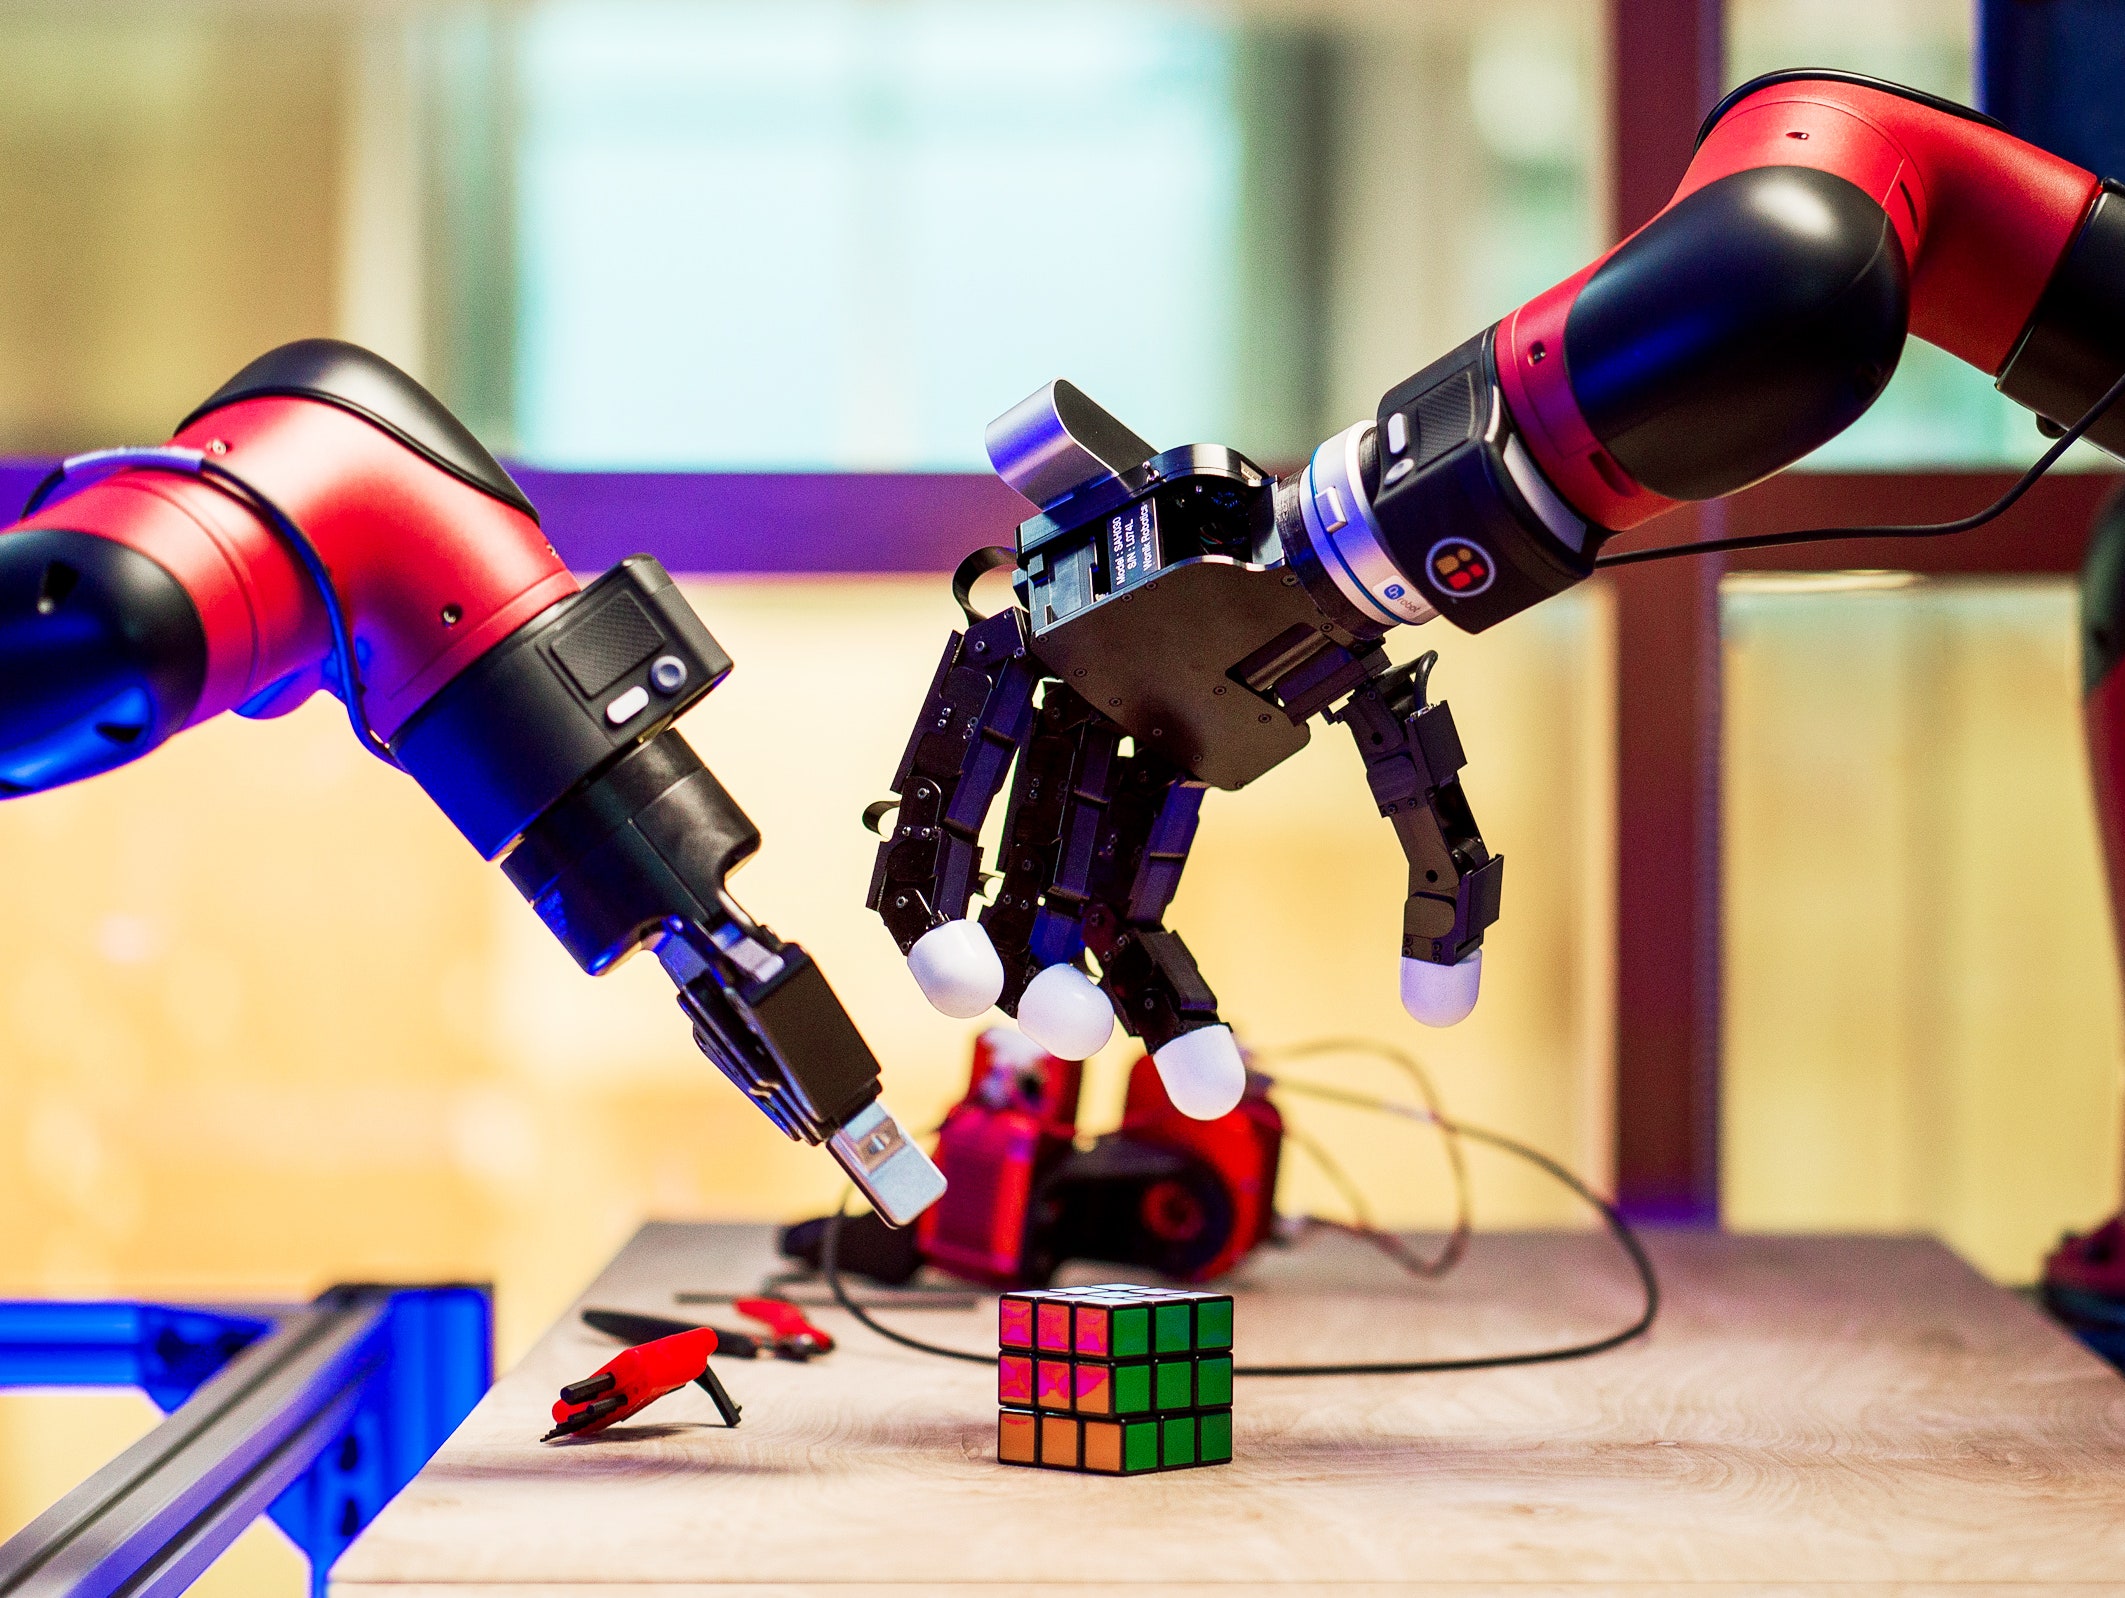 Creative and Design Thinking Workshop on Robotics highlights the significance of robots in addressing real-world challenges